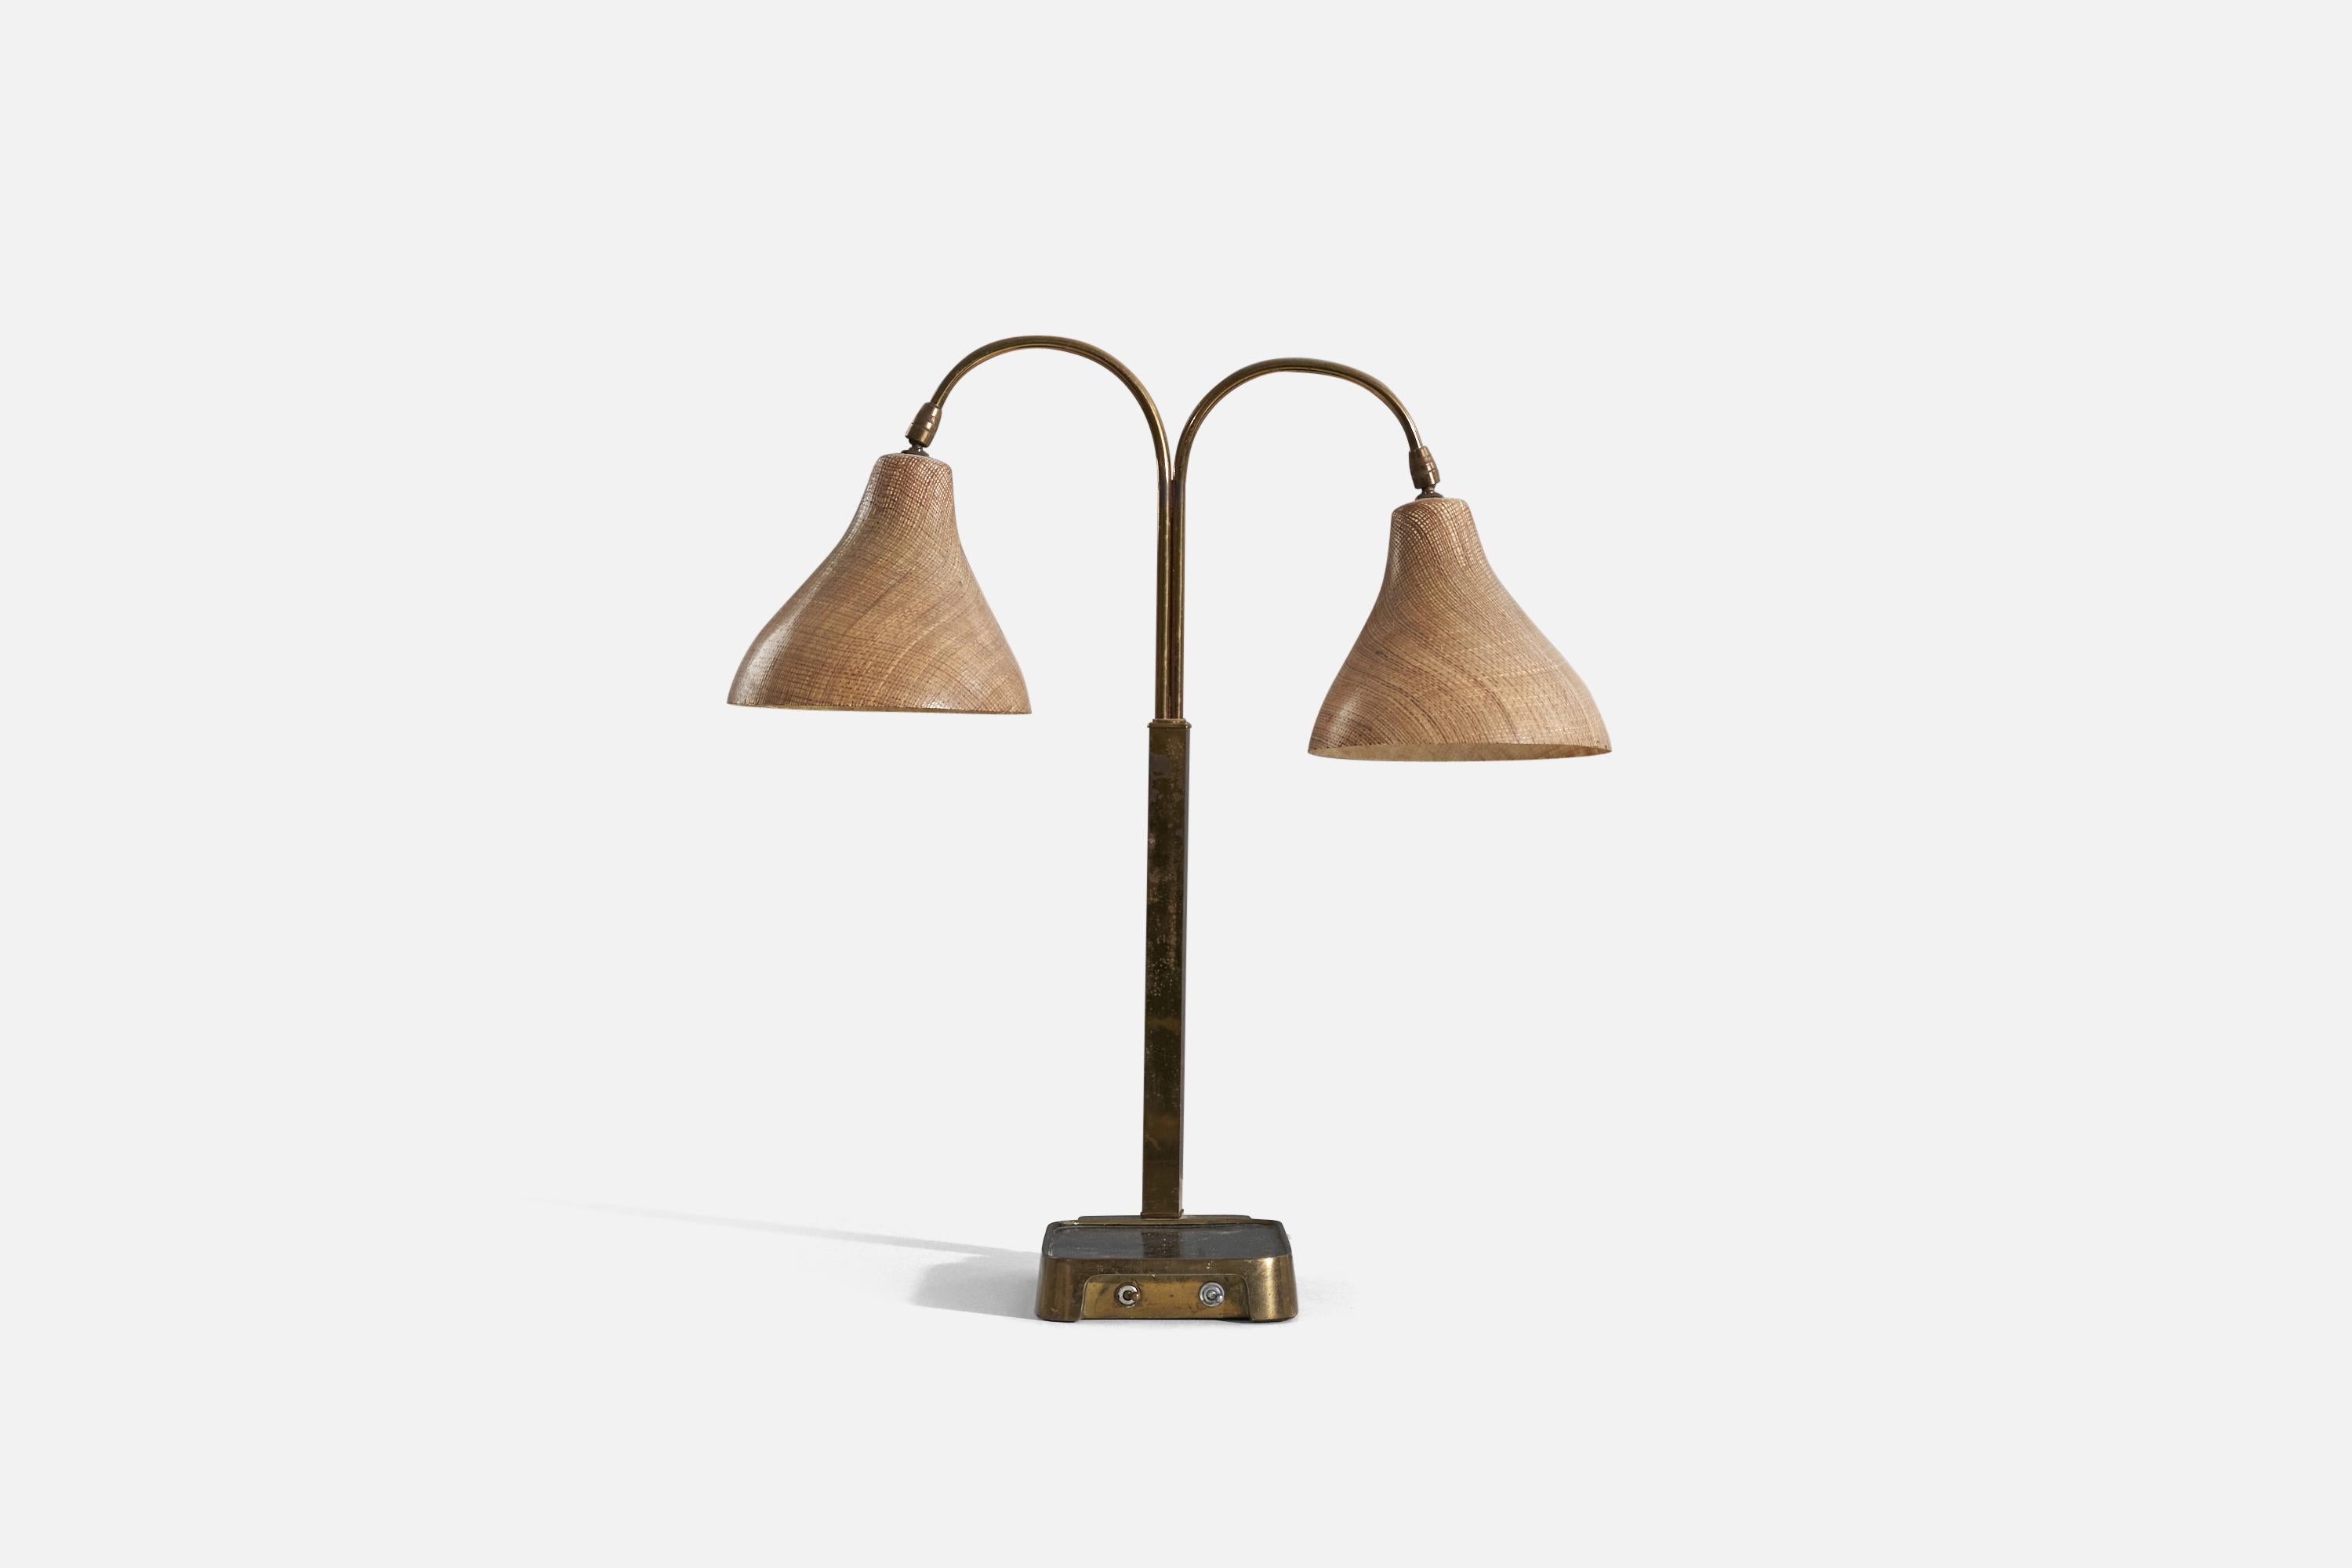 A brass, metal, raffia and fiberglass table lamp, designed and produced in United States, c. 1950s. 

Variable dimensions. Dimensions listed refer to the lamp mounted as illustrated in the first image.